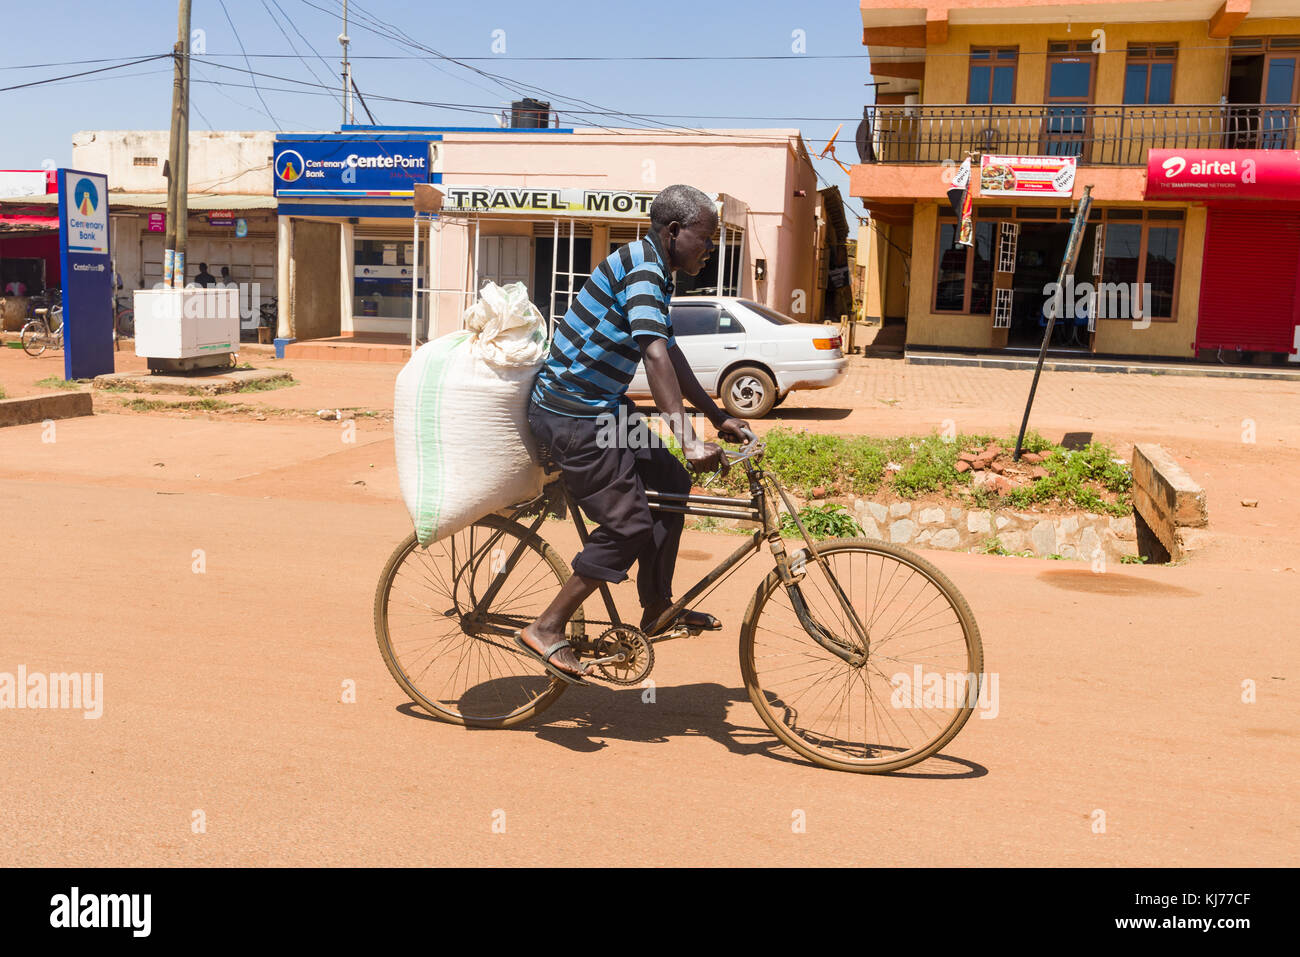 A Ugandan man cycling on a bicycle with a large bag on the back, Uganda, East Africa Stock Photo